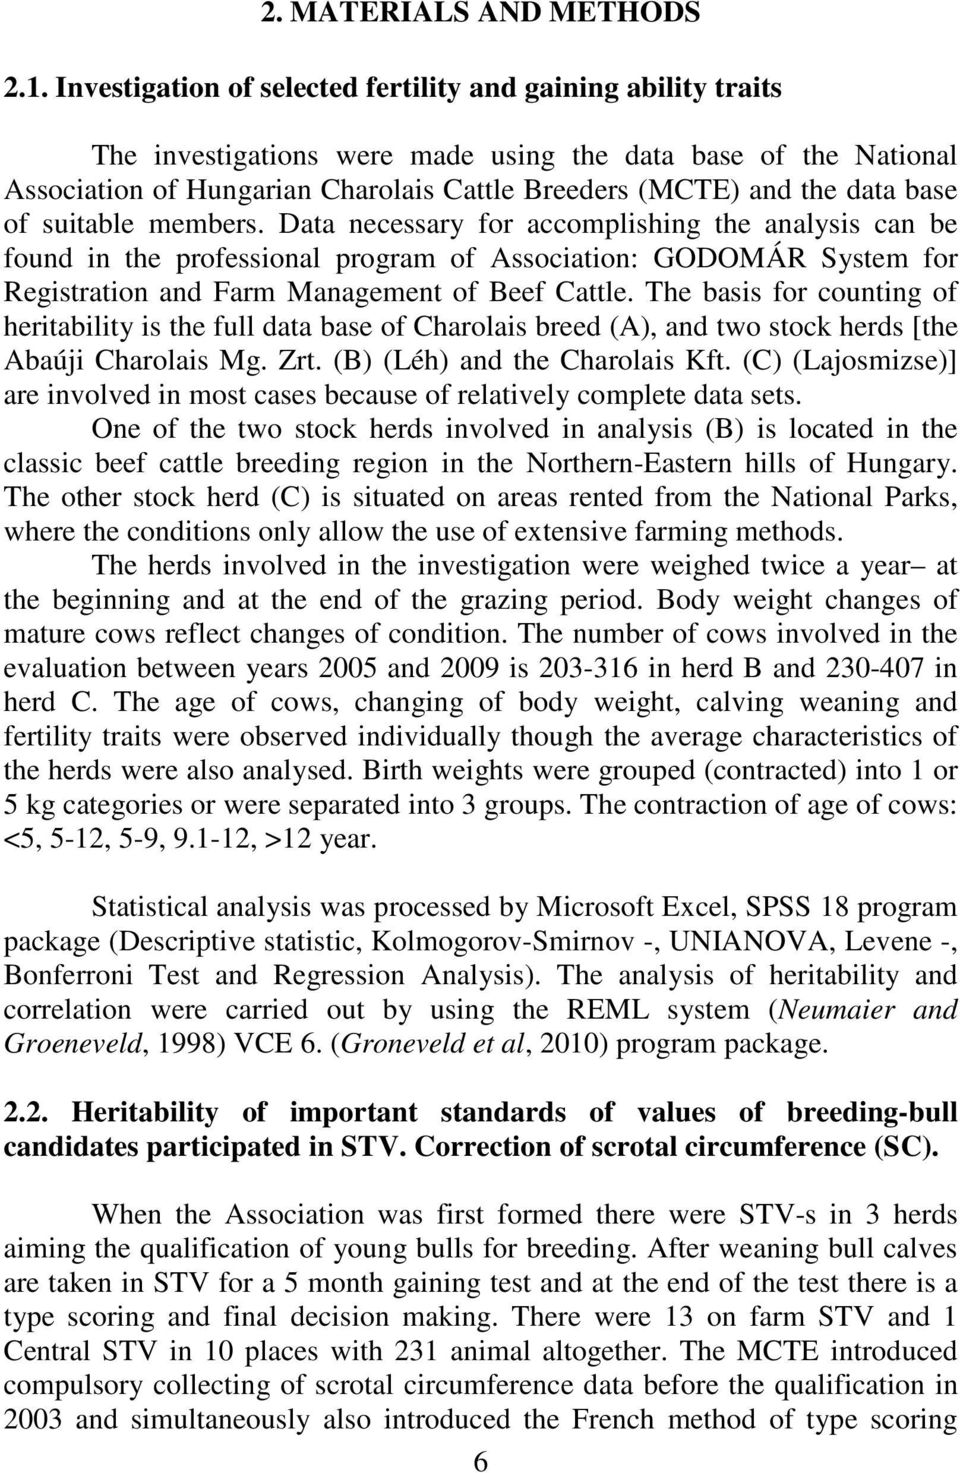 base of suitable members. Data necessary for accomplishing the analysis can be found in the professional program of Association: GODOMÁR System for Registration and Farm Management of Beef Cattle.